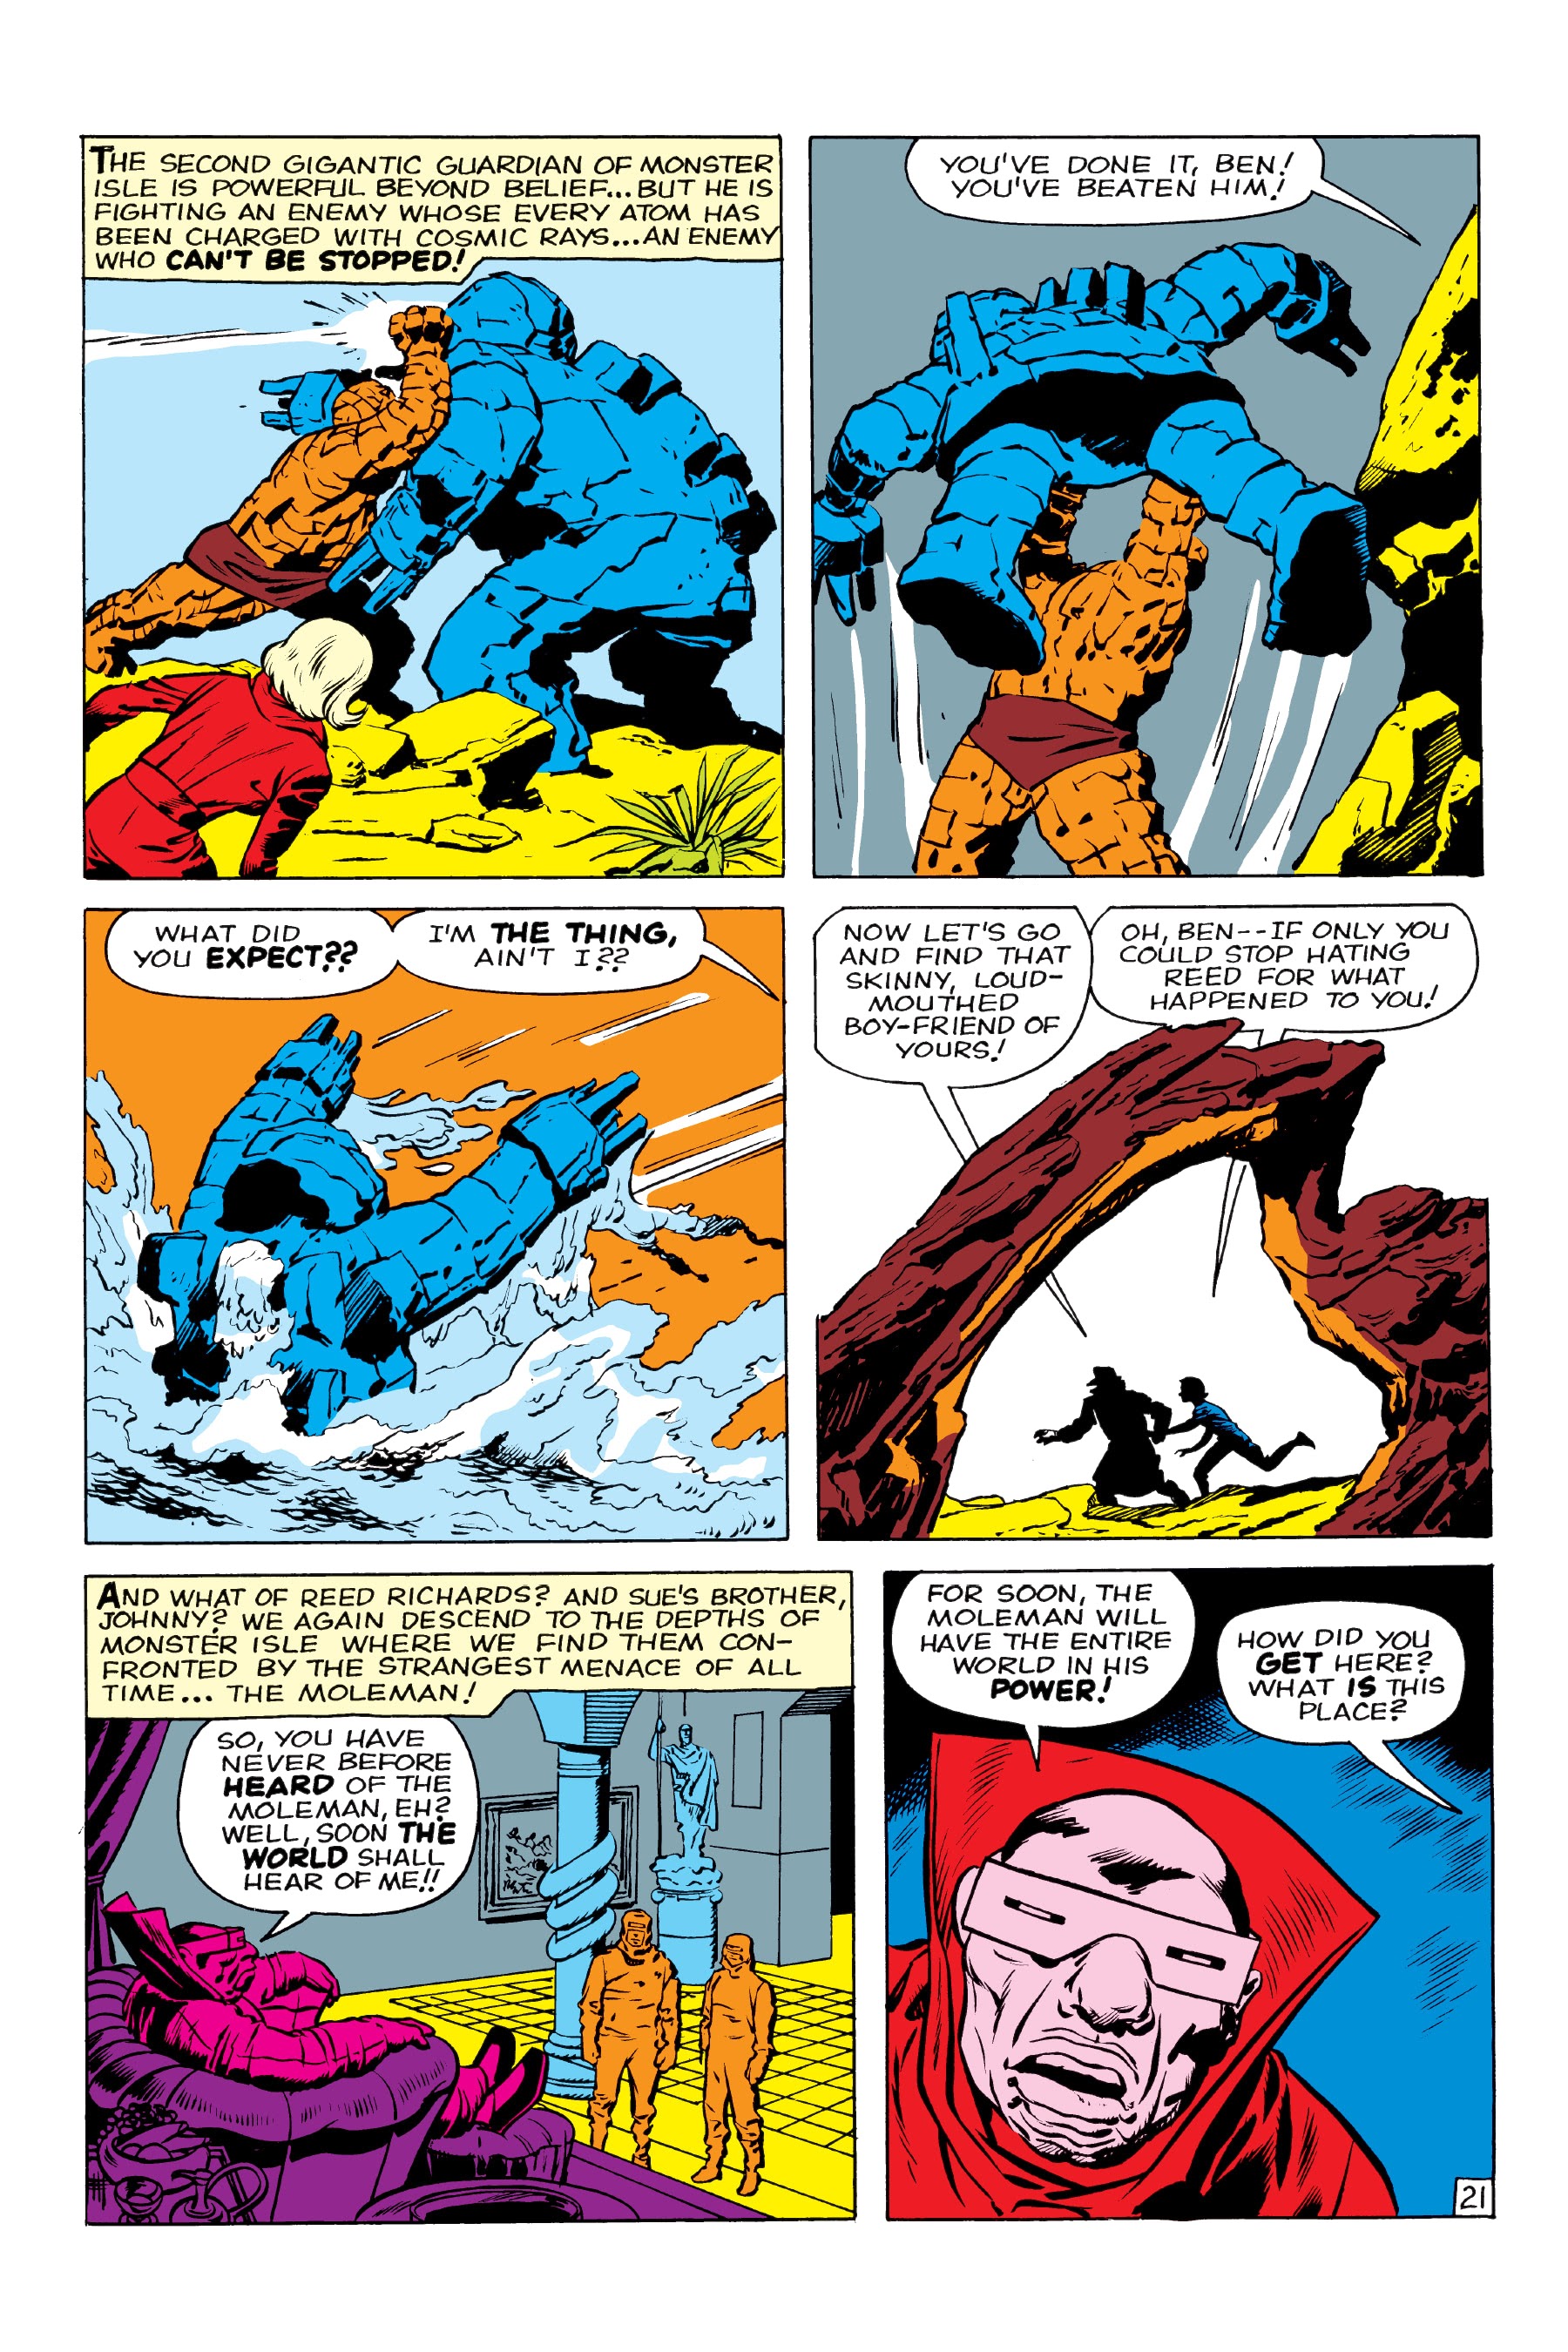 Read online Mighty Marvel Masterworks: The Fantastic Four comic -  Issue # TPB 1 (Part 1) - 28